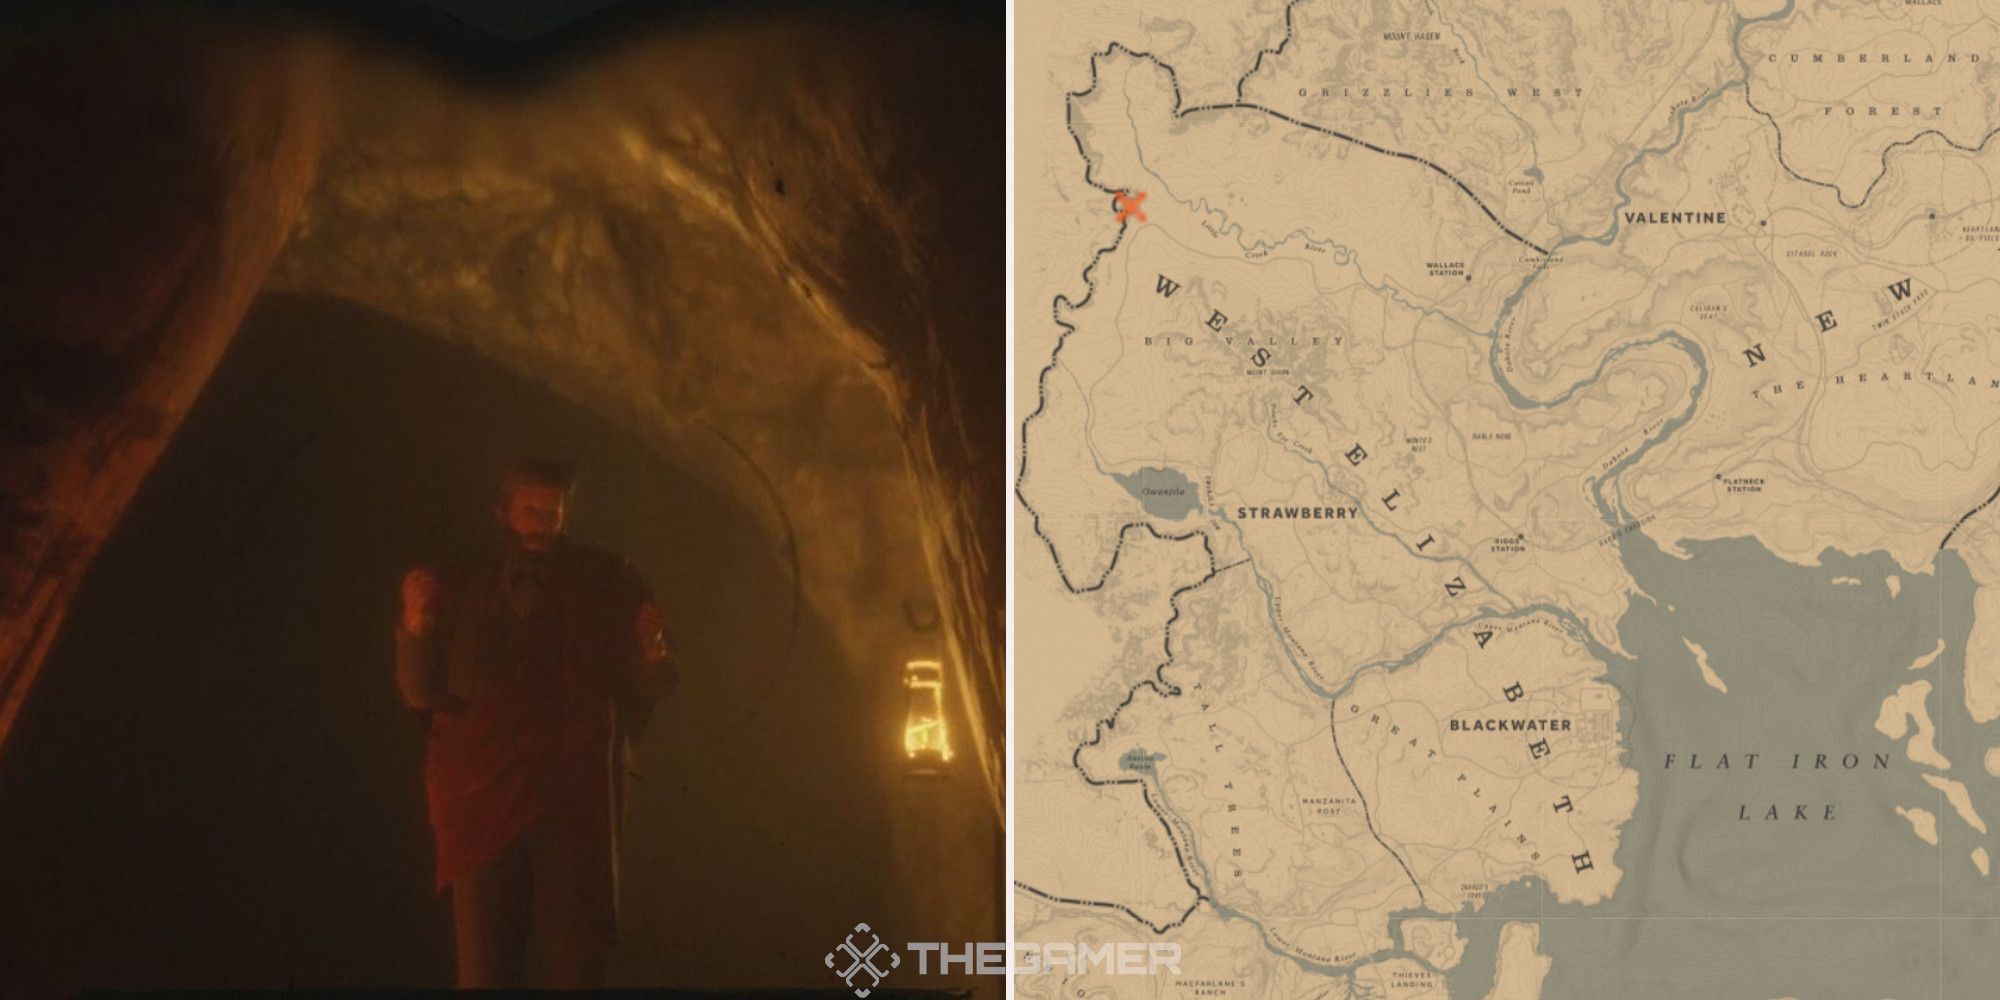 The hermit in his cave in Red Dead Redemption 2, next to an image of where his cave can be found marked on the map.